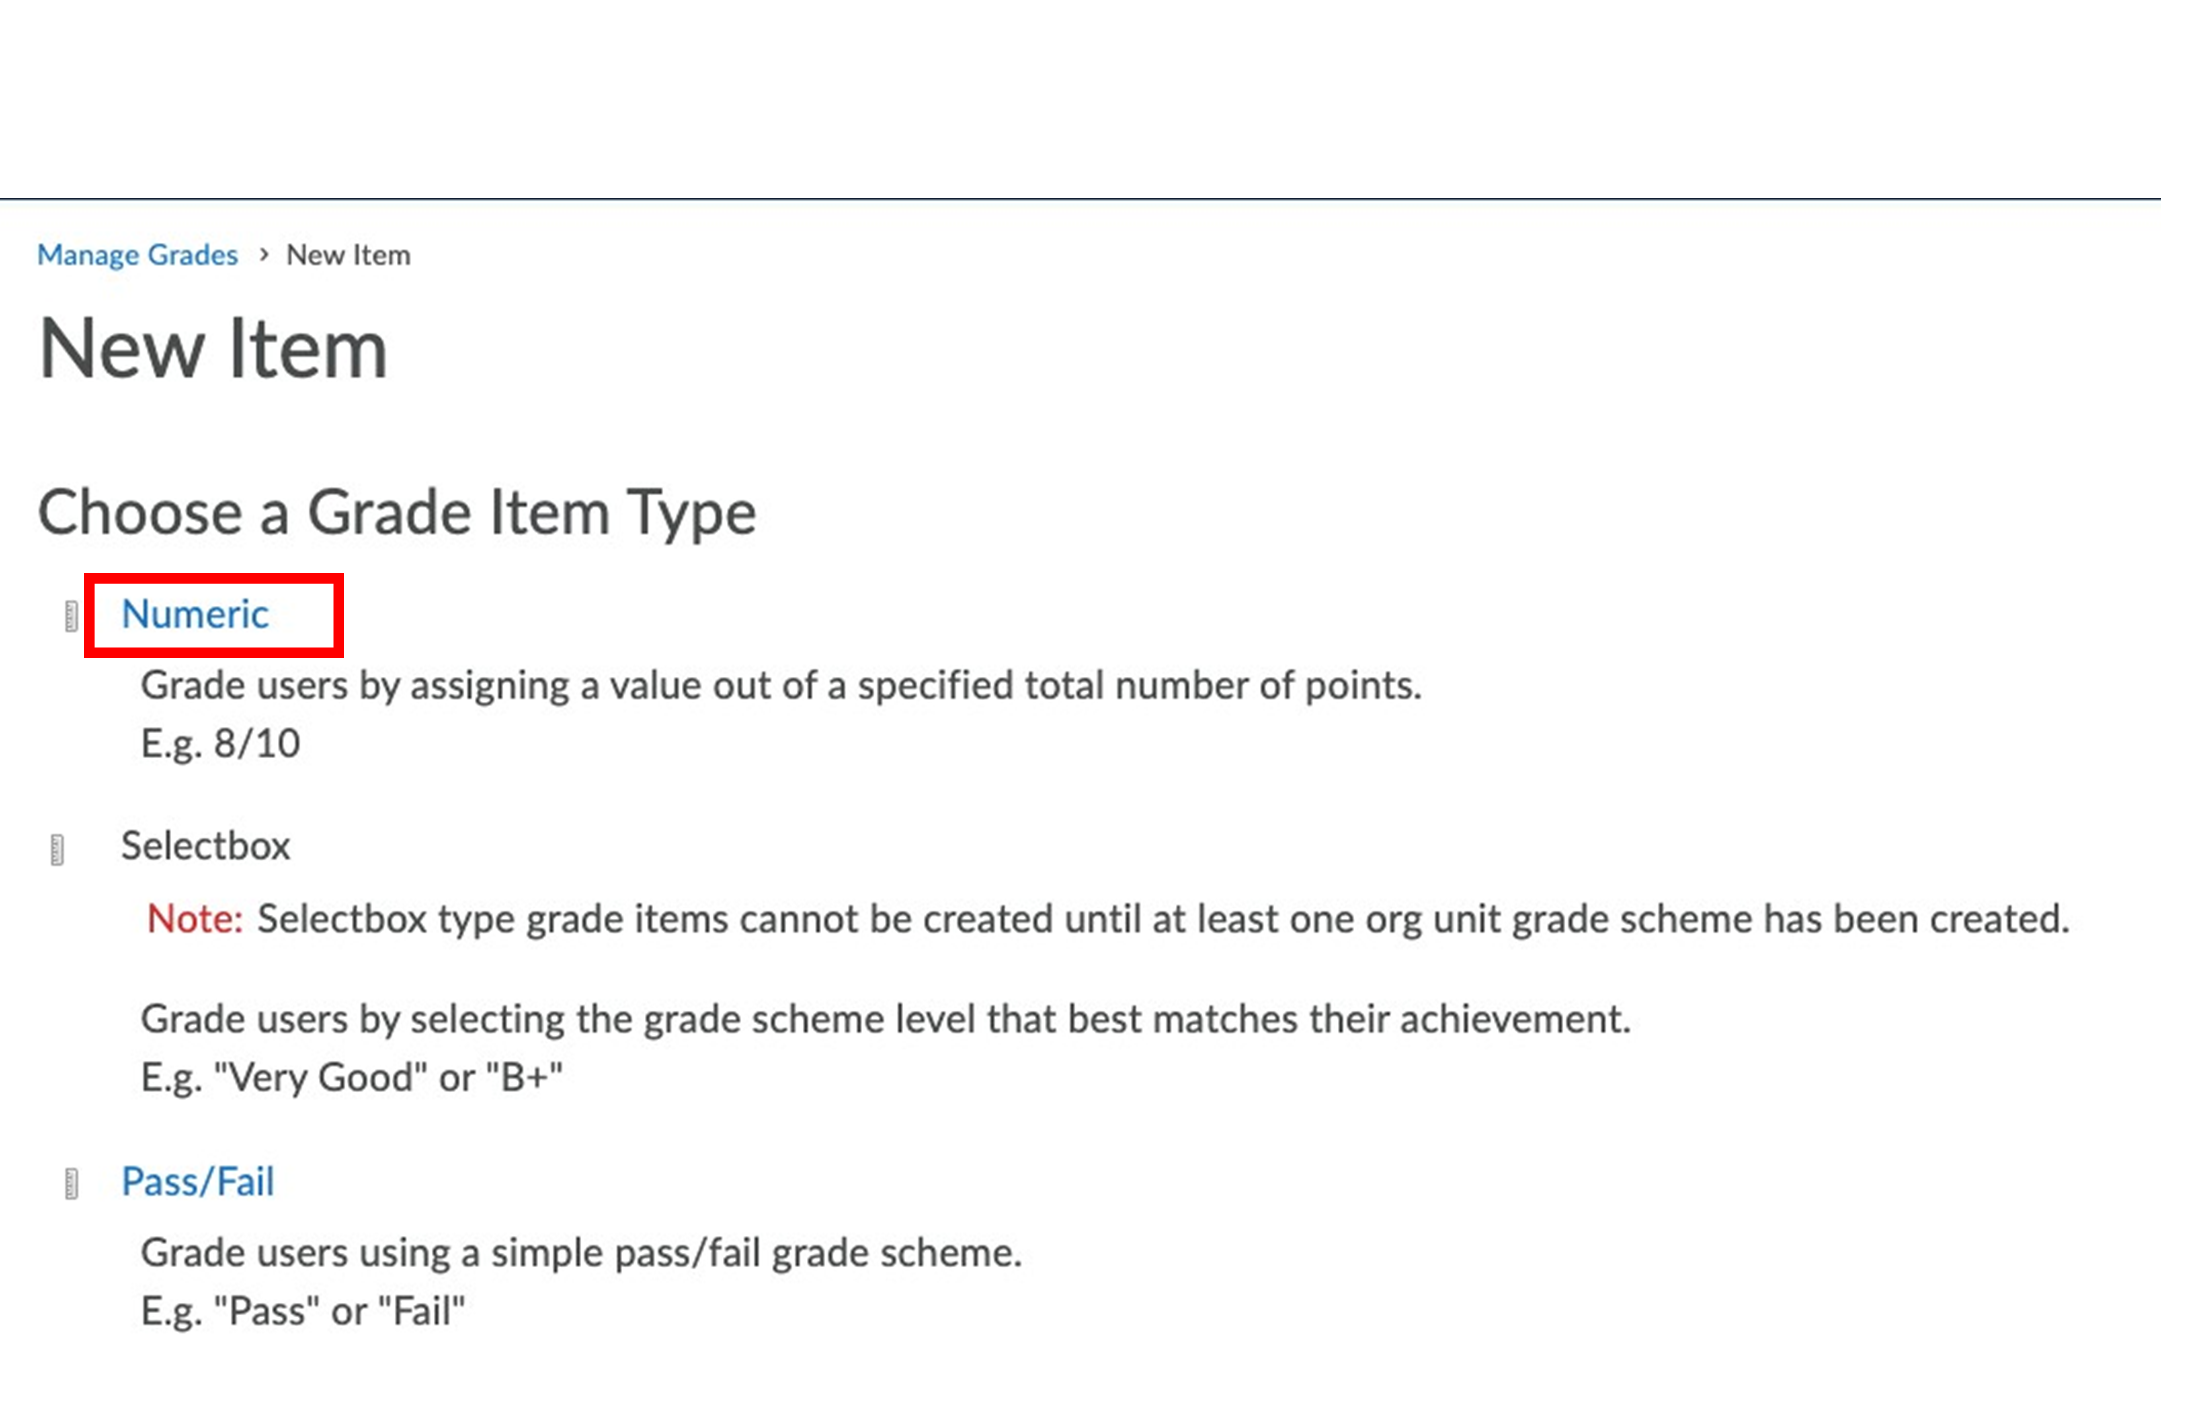 "Numeric" is the first of three new grade item type options: "Numeric" (assigning a score out of points), "selectbox" (giving a mark using a grade scheme), and "Pass/Fail".